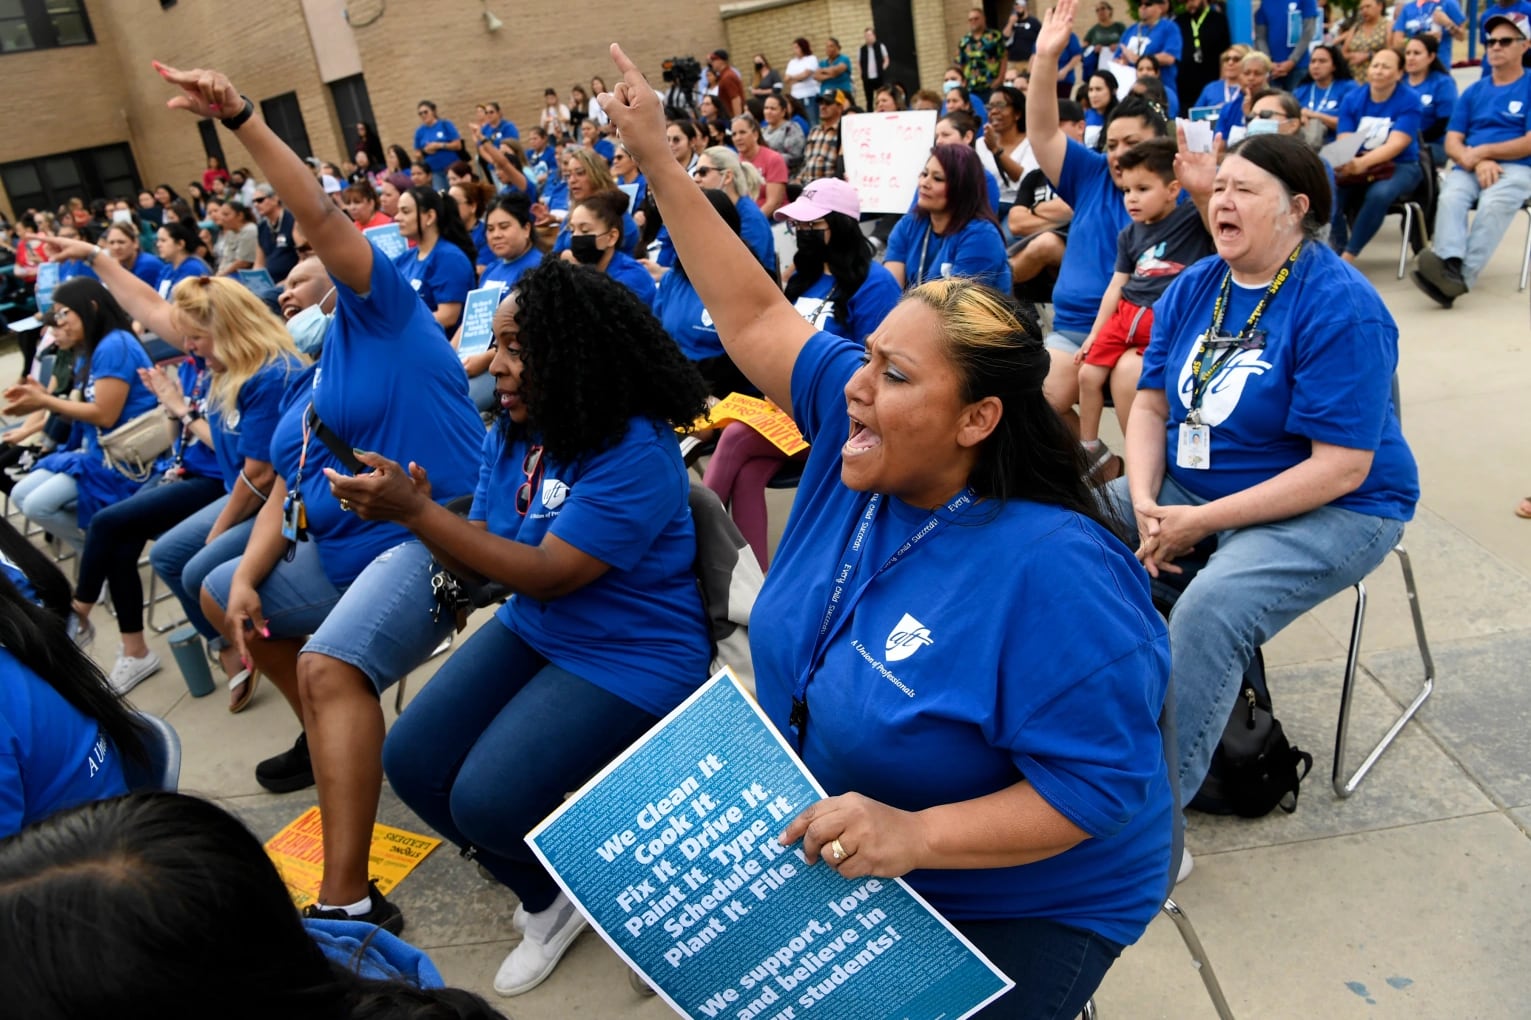 Women wearing matching blue T-shirts seated in chairs shout and cheer with their hands in the air during a rally to increase the minimum wage in Denver Public Schools.